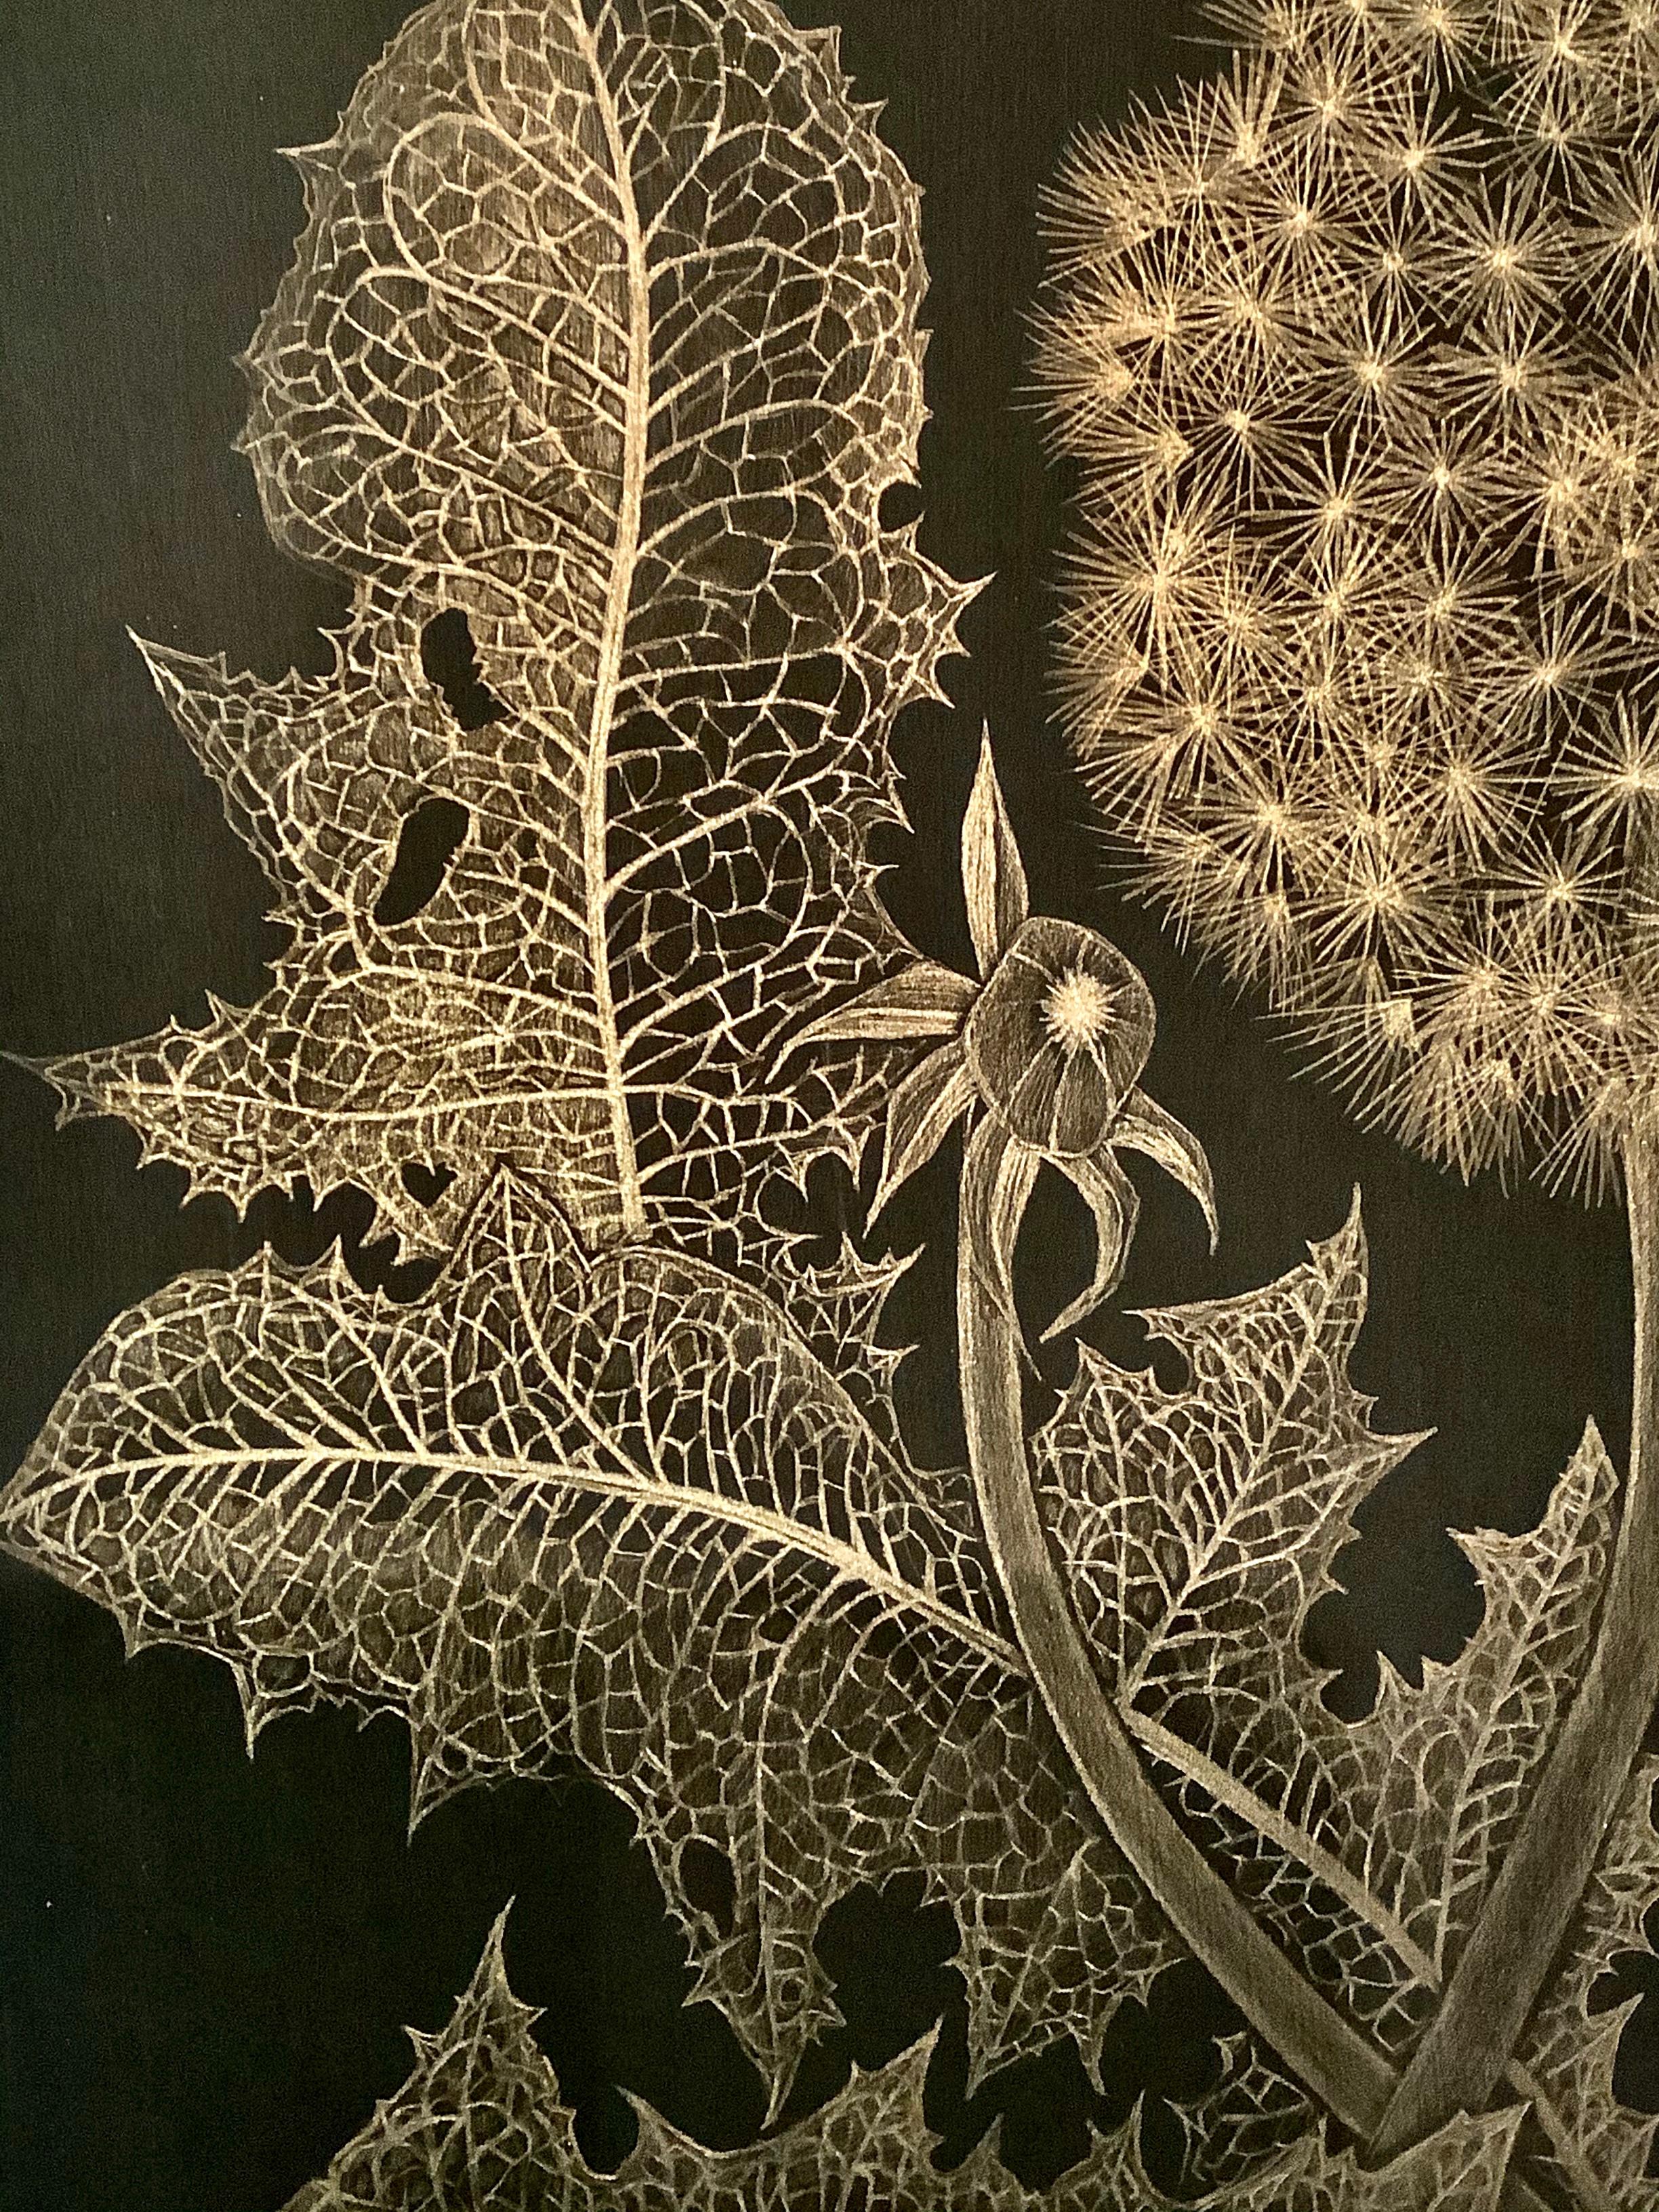 This delicate botanical drawing is made with 14 karat gold on painted black paper. The exploration of ephemerality, and the fragility of a dandelion gone to seed, its leaves and buds are the focus of this series by Margot Glass. The exquisite beauty